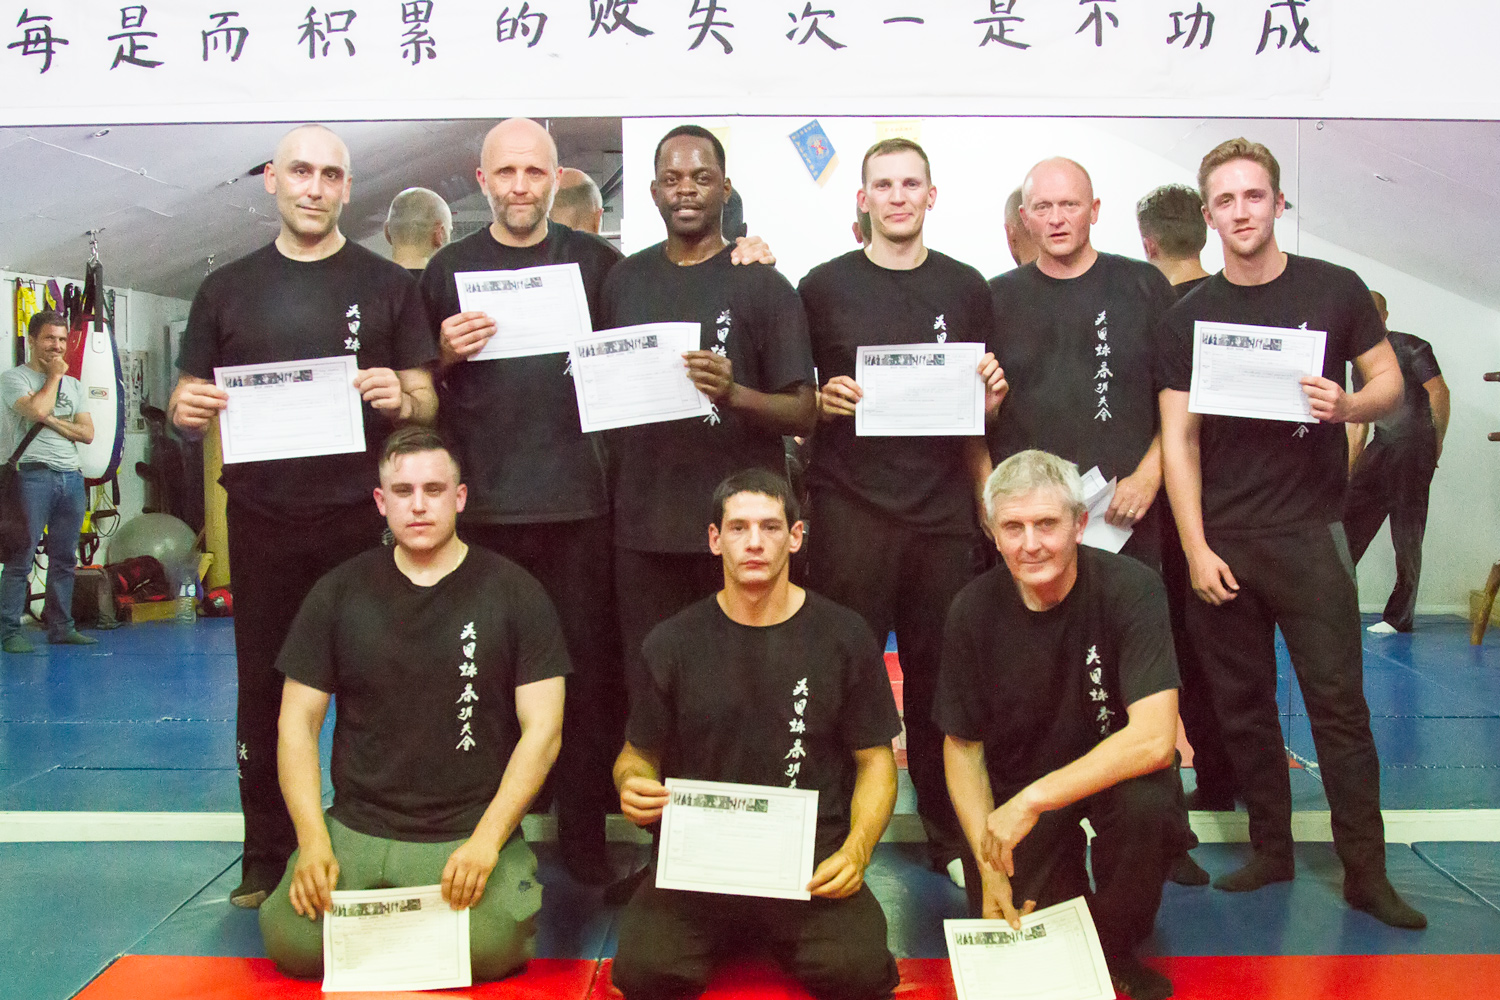 The UKWCKFA has only two compulsory gradings to move through classes. The Siu Nim Tao grading allows students to move to the advanced classes.